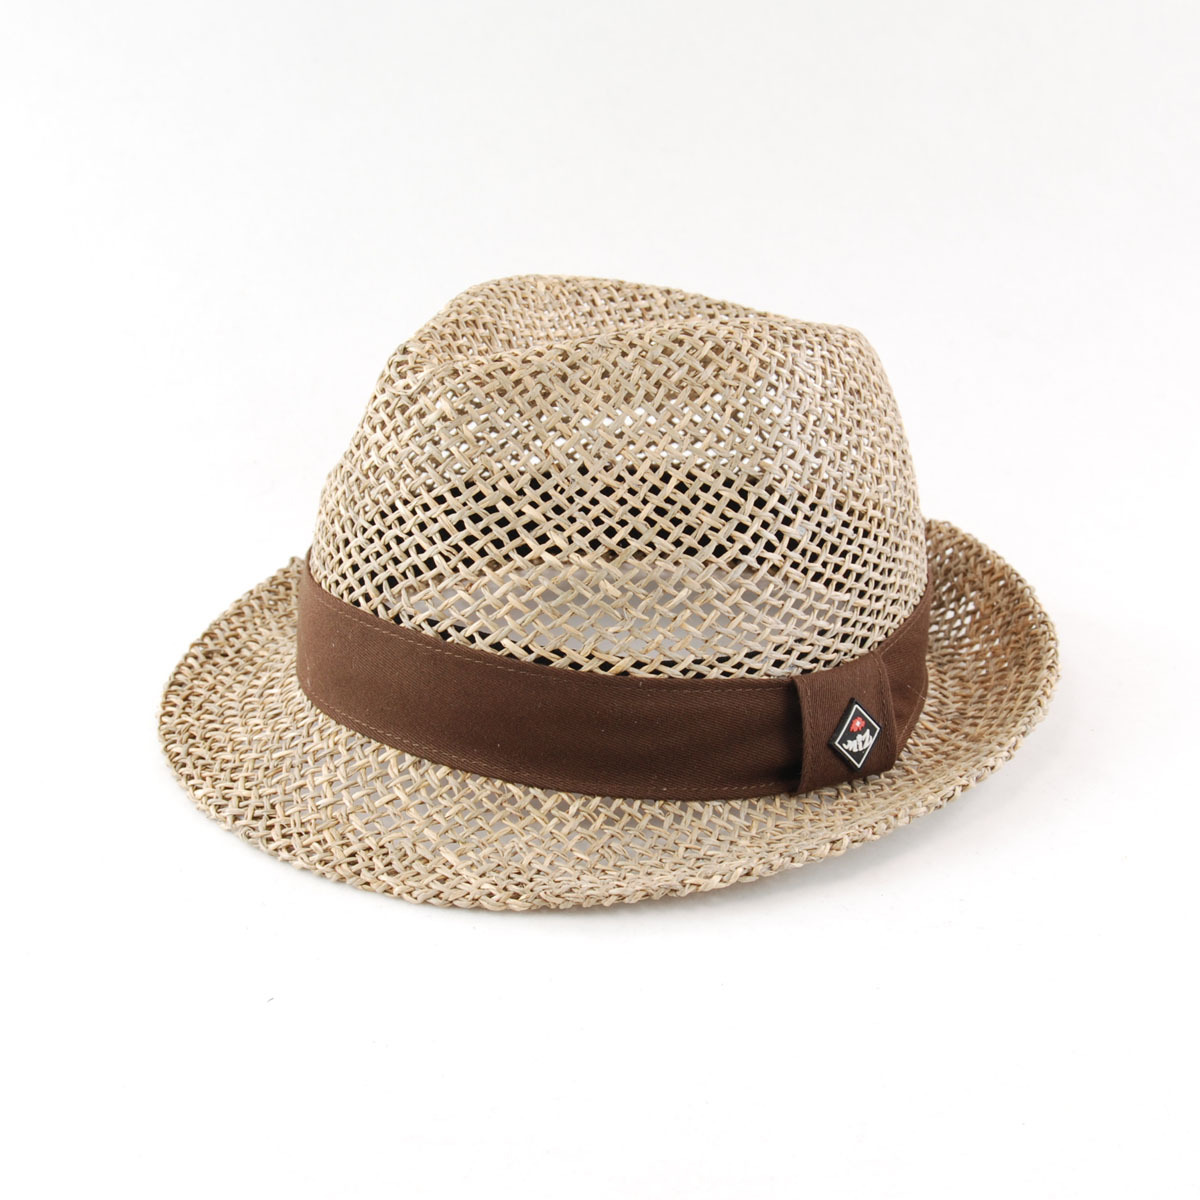 Captale male strawhat small denim style in hat off to sun hat sunbonnet